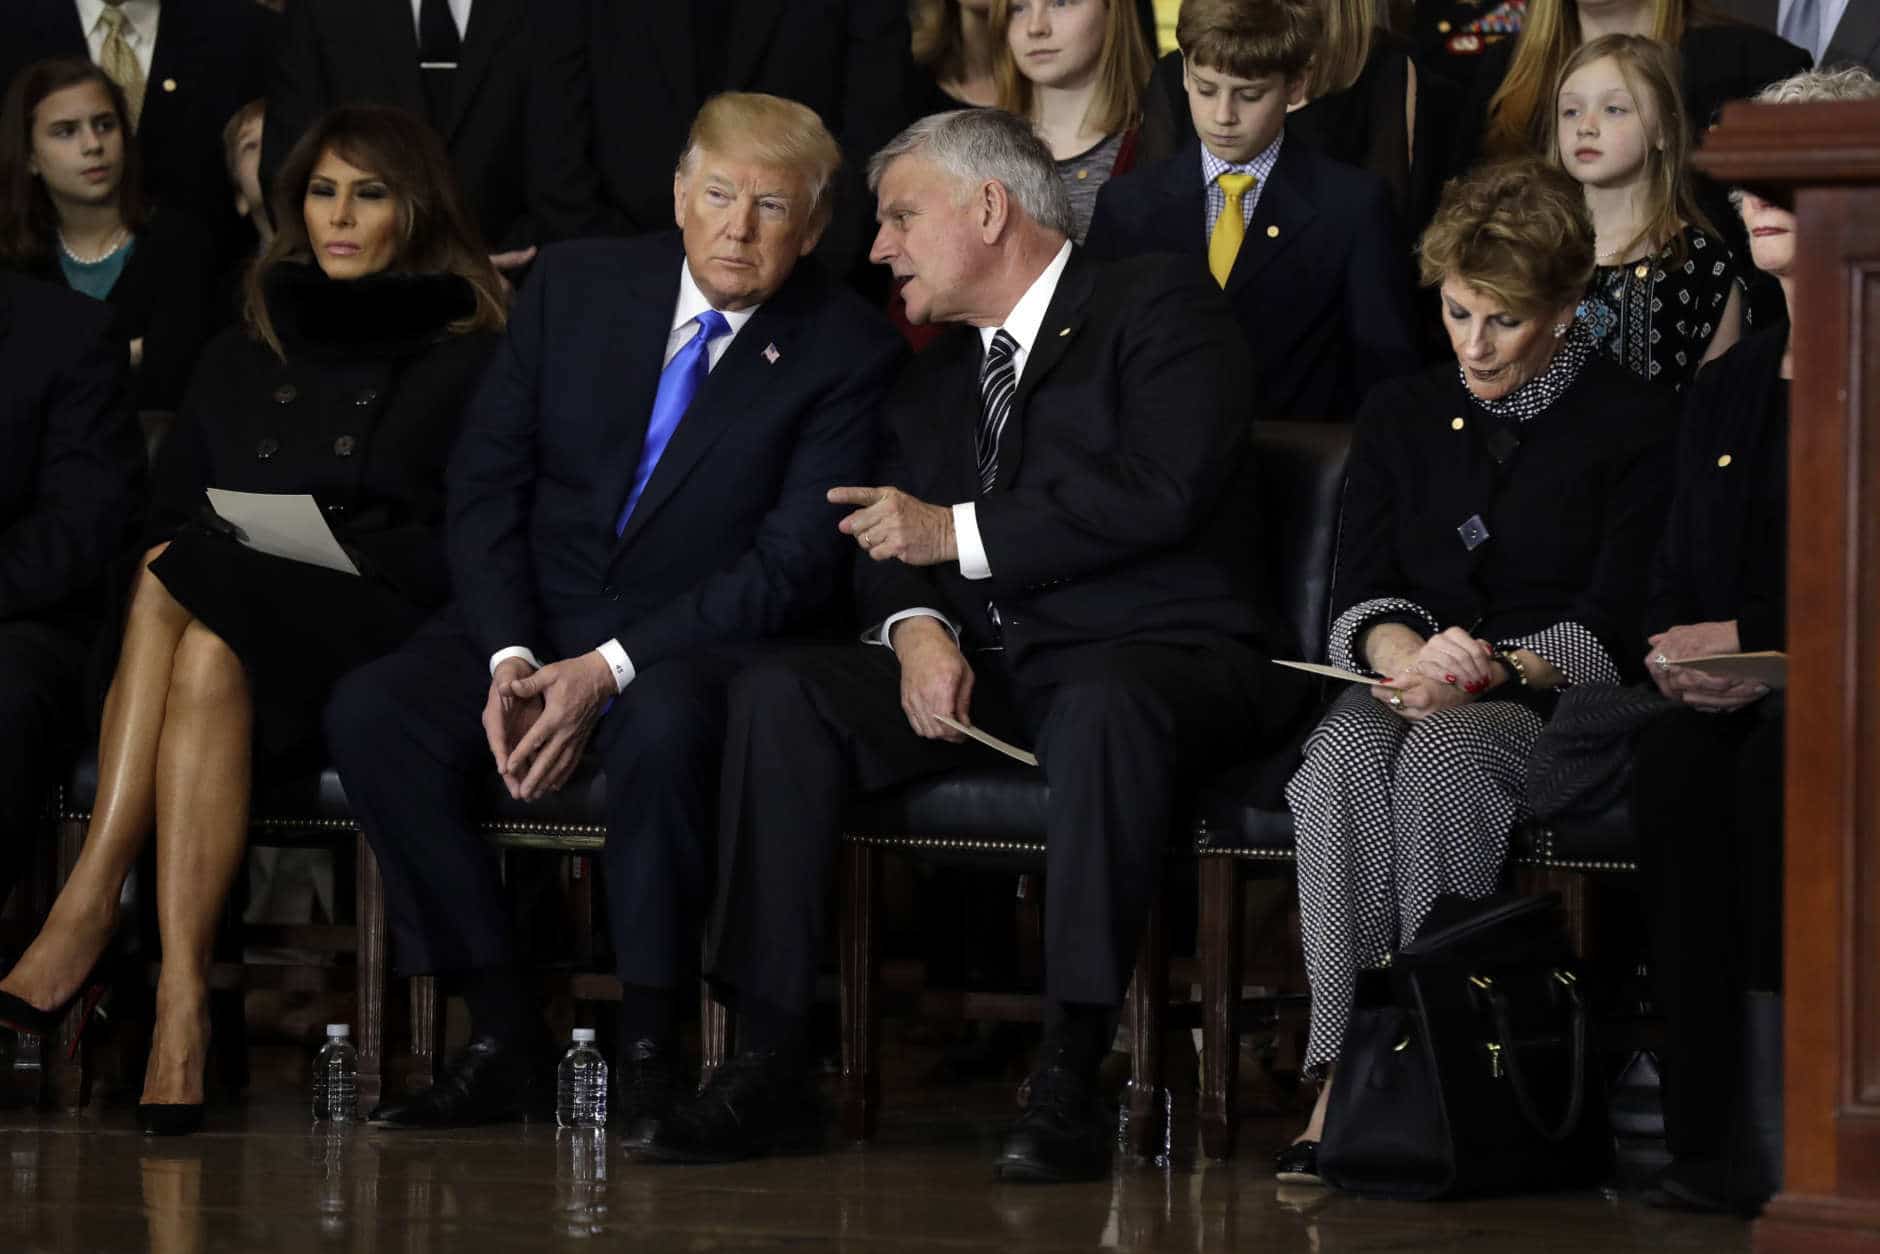 President Donald Trump talks to Franklin Graham during a ceremony honoring Reverend Billy Graham in the Rotunda of the U.S. Capitol building, Wednesday, Feb. 28, in Washington. (AP Photo/Evan Vucci)